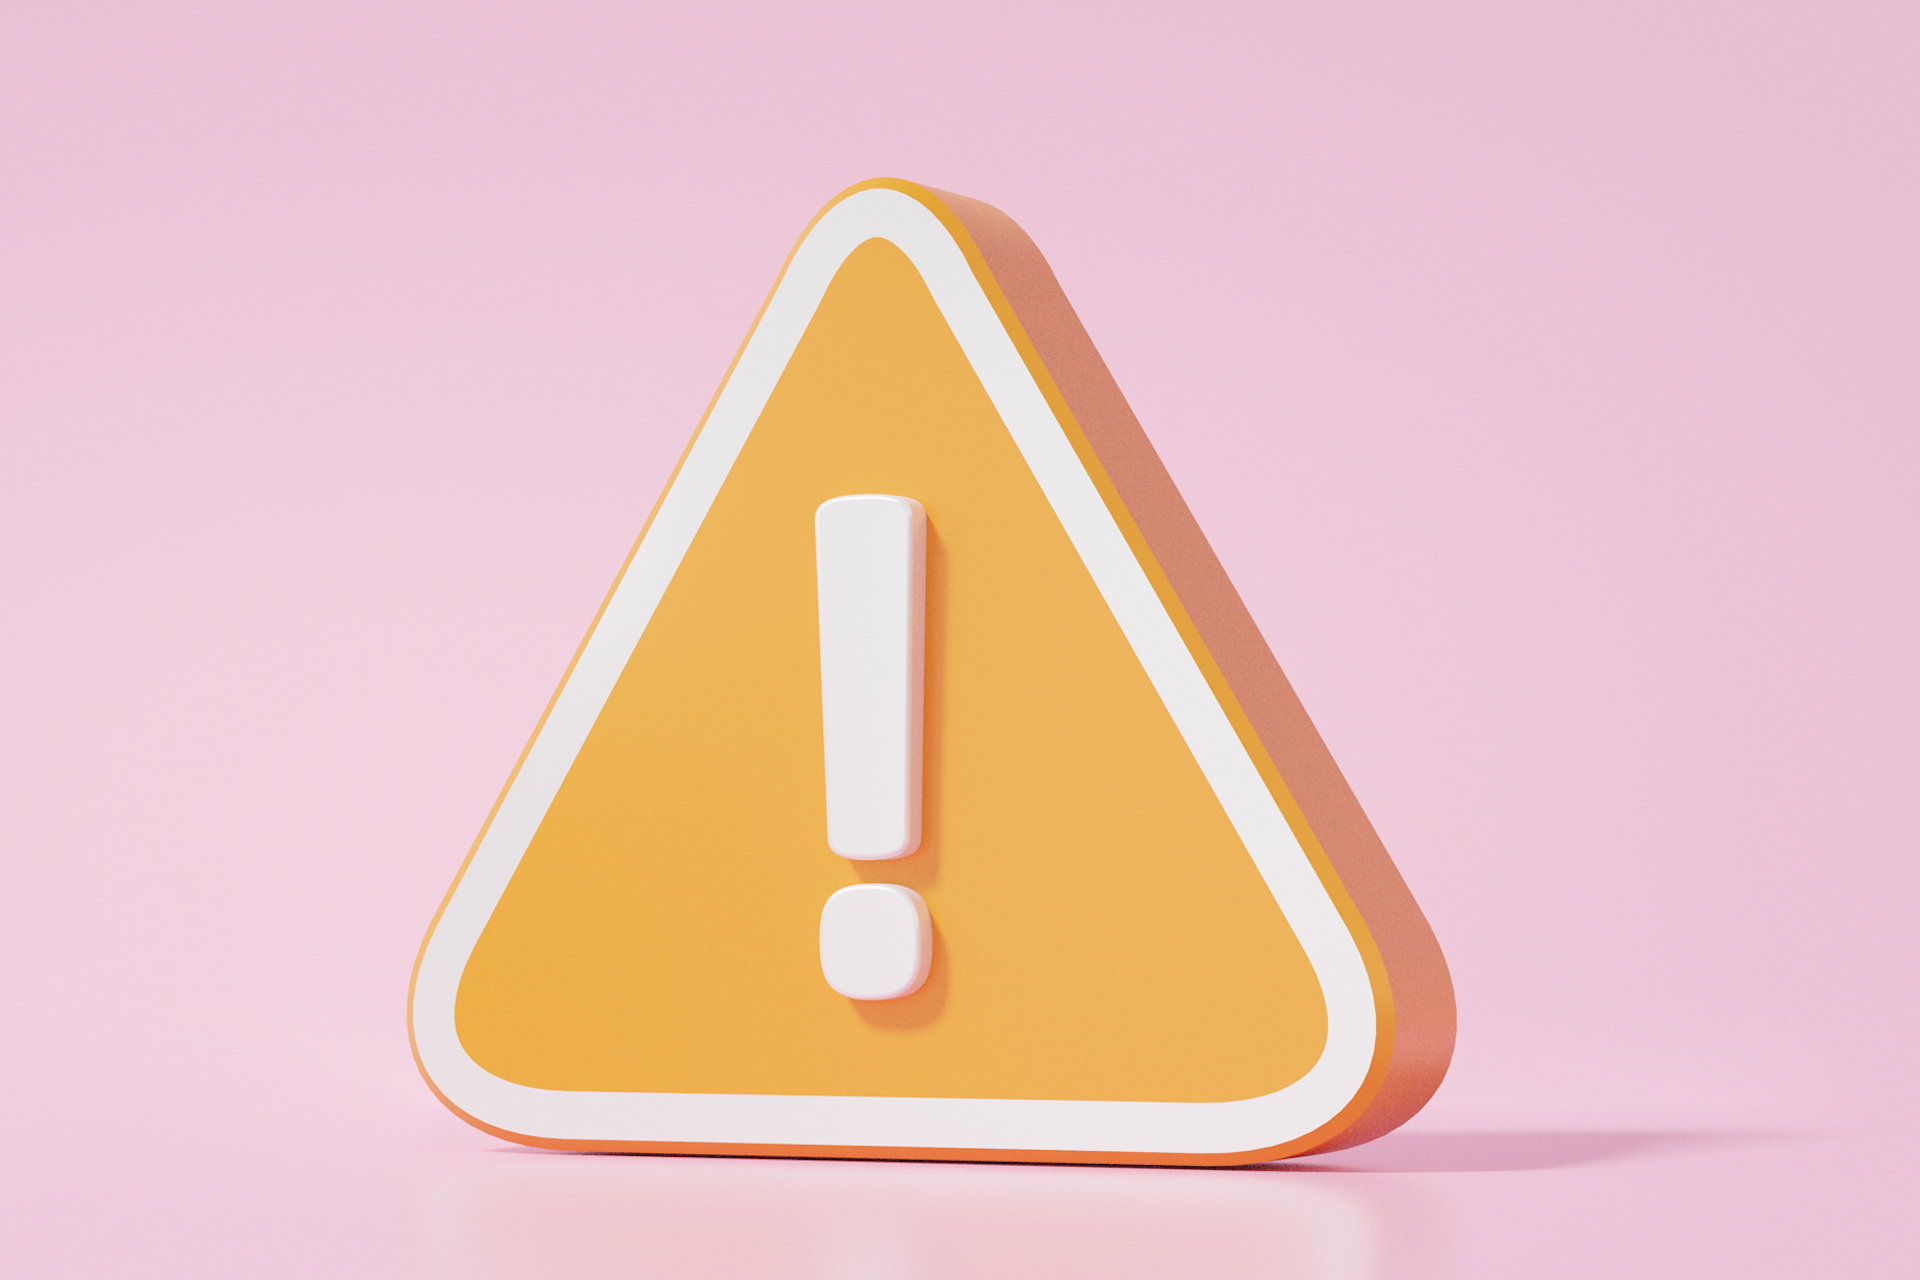 Yellow yield sign on a pink background. Don't make these common social media mistakes!